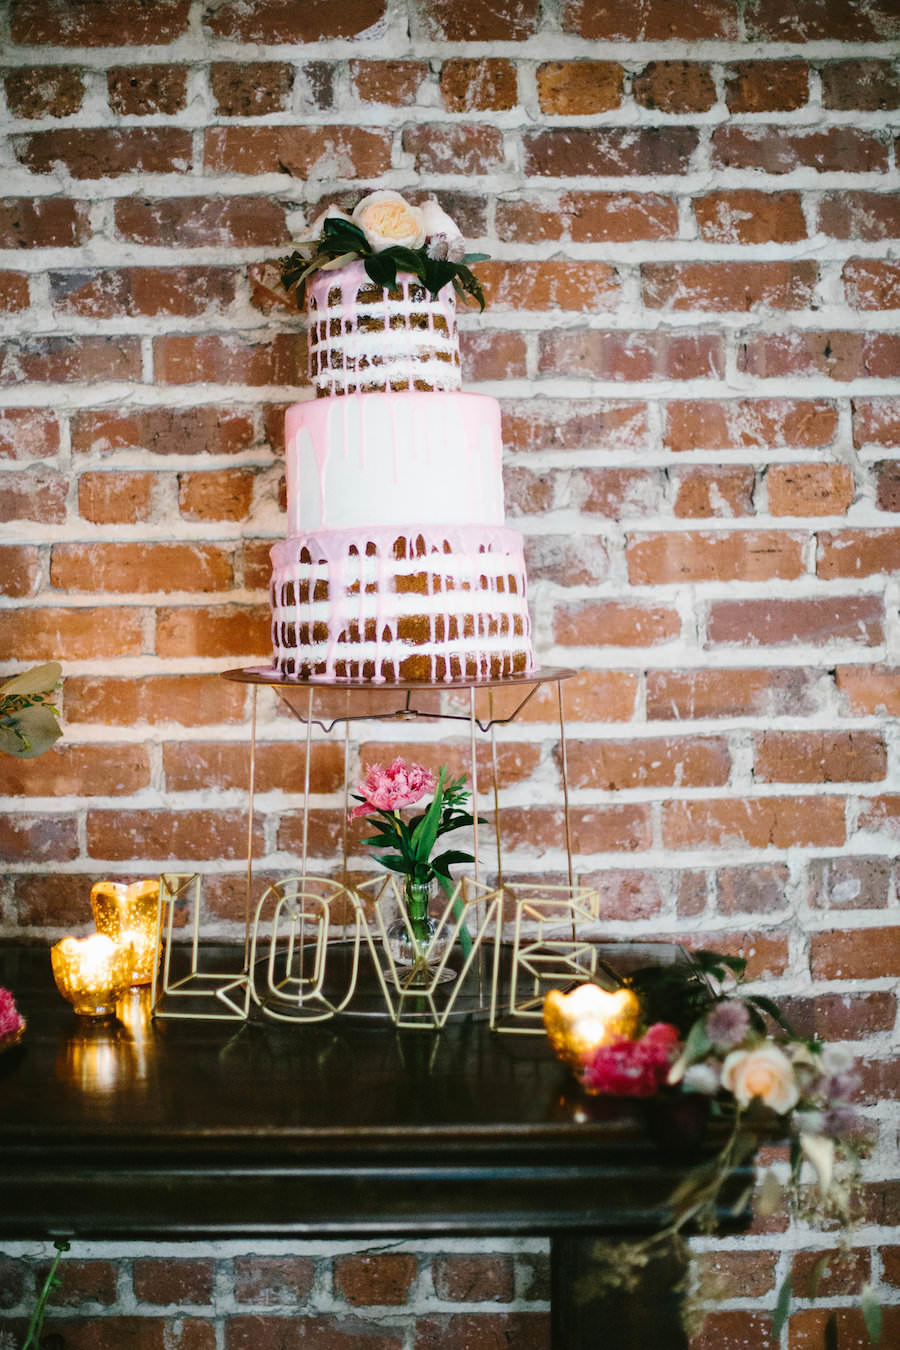 Florida, Modern Bohemian Inspired Styled Shoot Dessert Table with Cookies and Three Tiered Naked Cake | Vintaged Wooden Dessert Table | Tampa Bay Wedding Planner Glitz Events